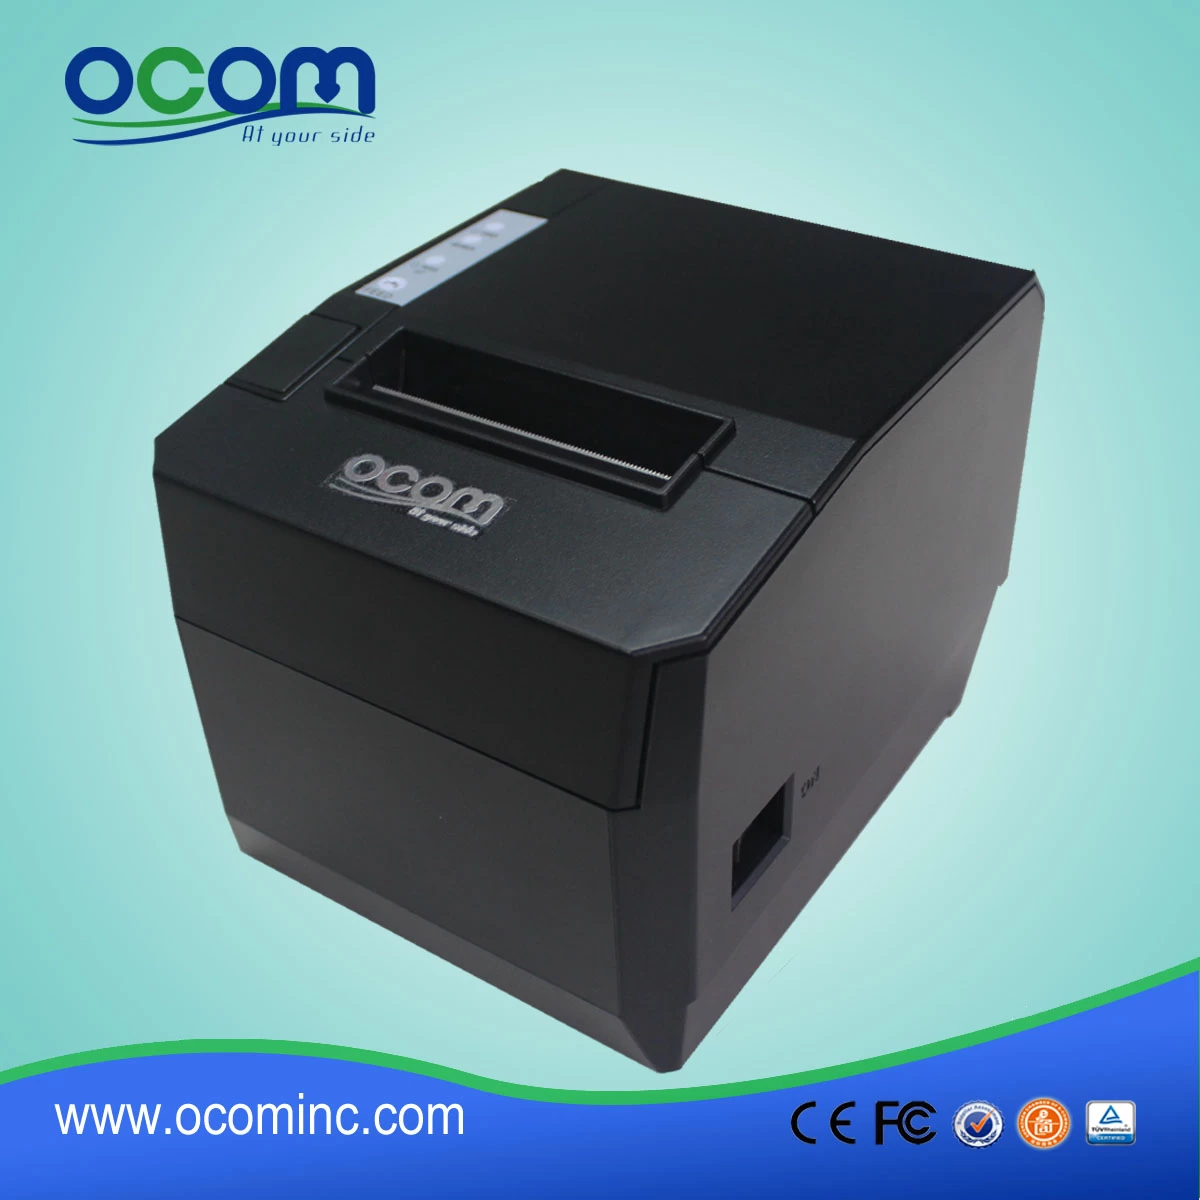 80mm receipt thermal printer with auto cutter for POS application (OCPP-88A)